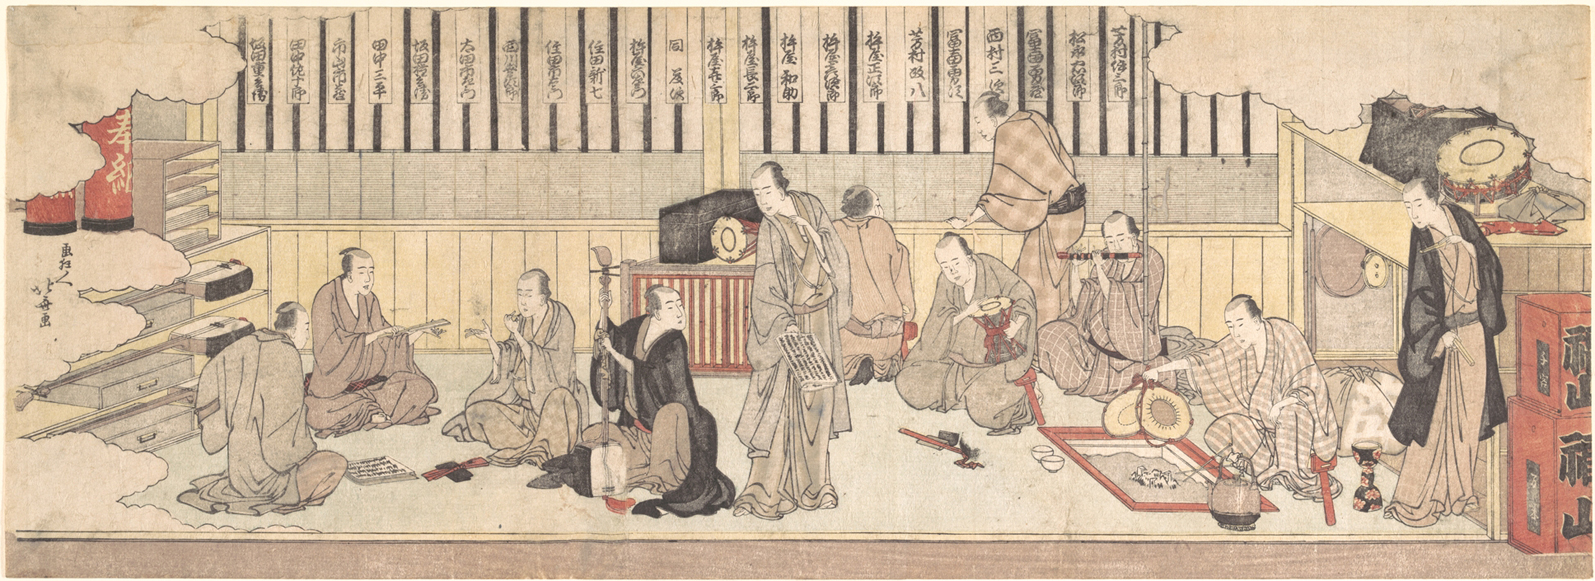 Hokusai - Dressing Room for Musicians at a Theater - Long Surimono